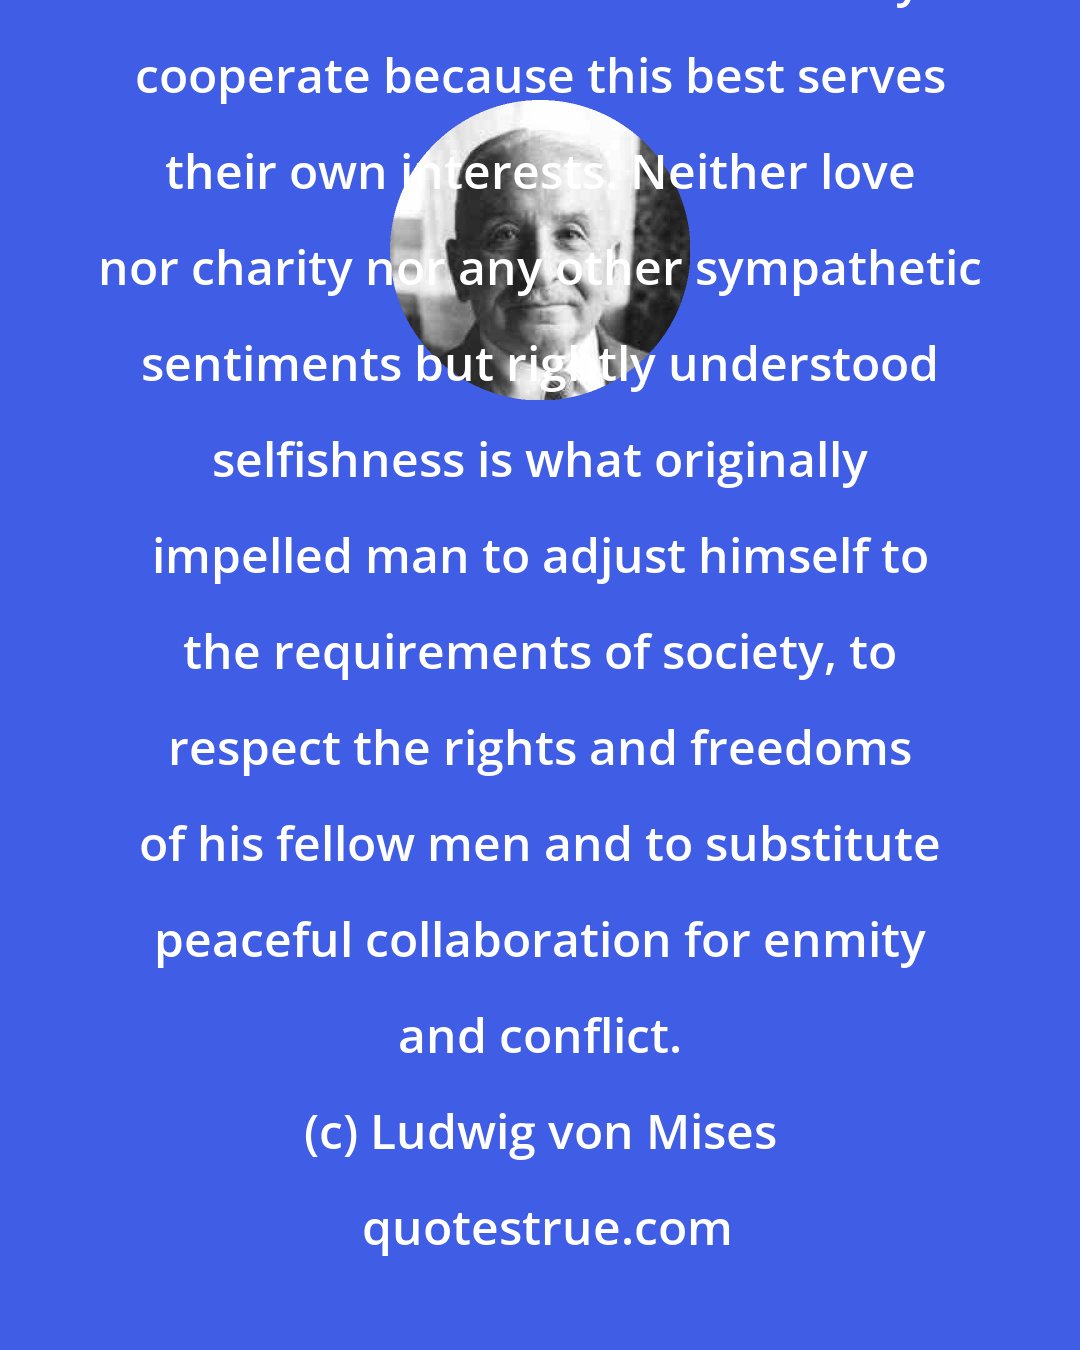 Ludwig von Mises: People do not cooperate under the division of labor because they love or should love one another. They cooperate because this best serves their own interests. Neither love nor charity nor any other sympathetic sentiments but rightly understood selfishness is what originally impelled man to adjust himself to the requirements of society, to respect the rights and freedoms of his fellow men and to substitute peaceful collaboration for enmity and conflict.